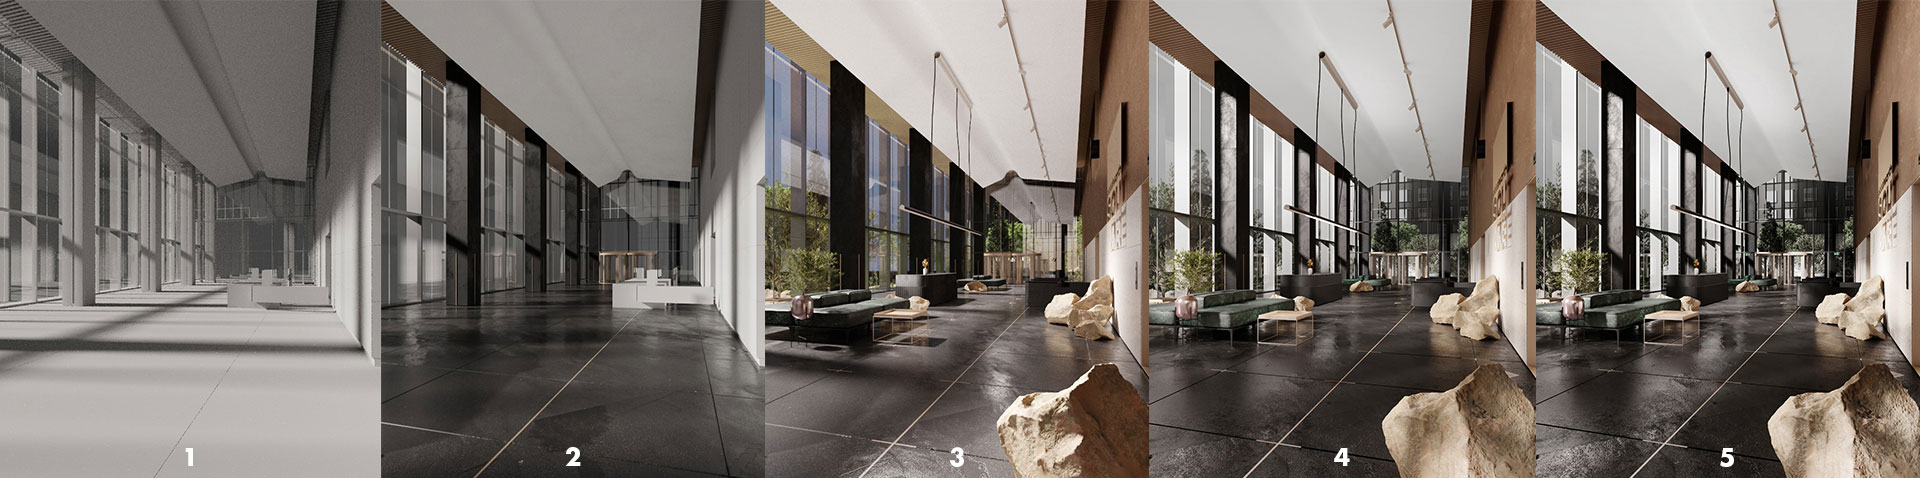 The visualization steps for the lobby interior.